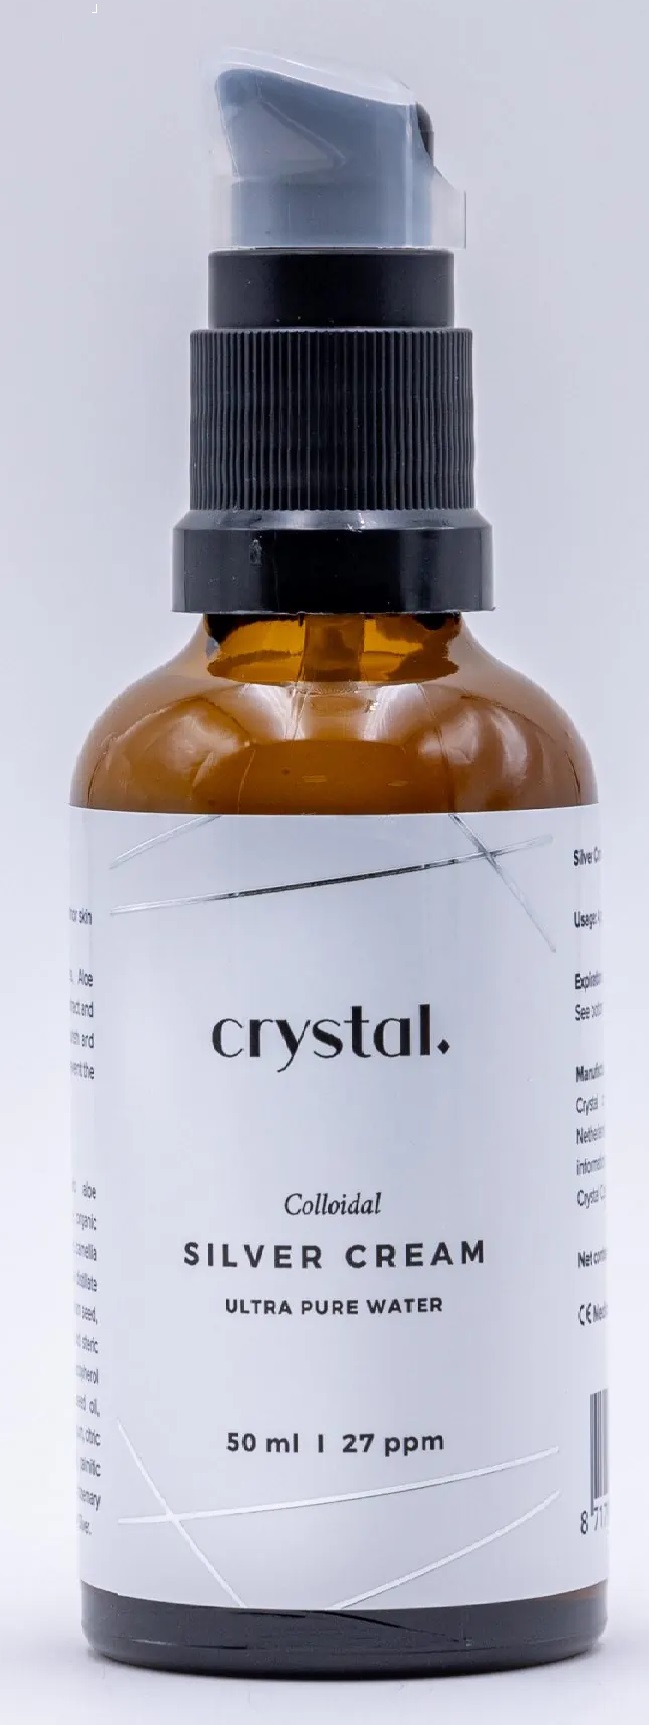 Crystal colloidaal zilvercreme 27ppm